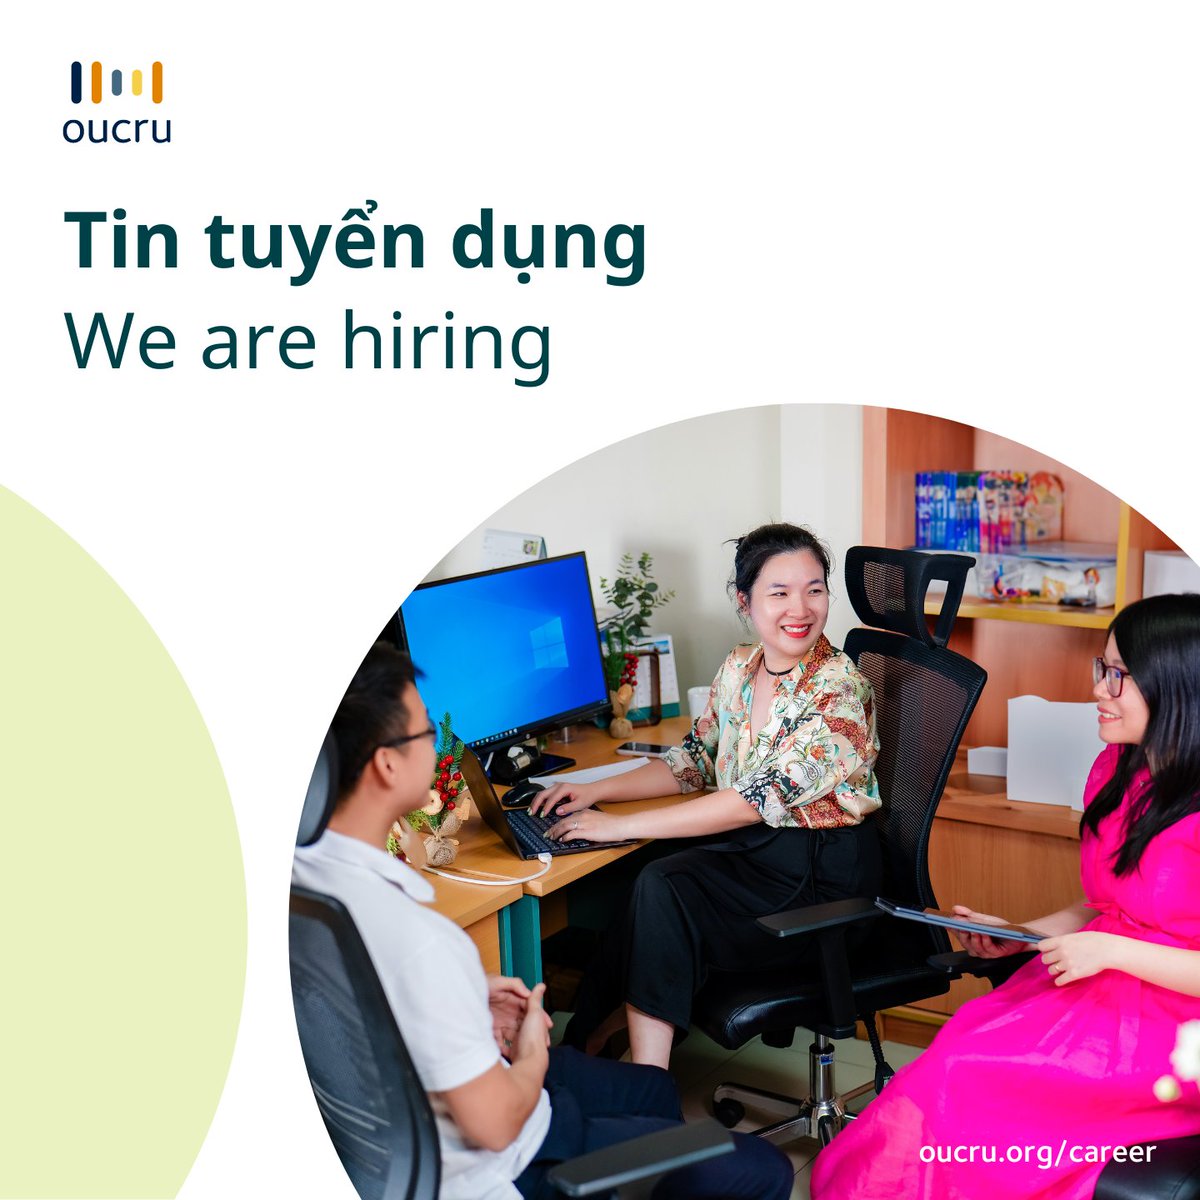 💥 Open positions: ‣ (HCMC) PCE Comms Manager ‣ (HCMC) Data Manager ‣ (HCMC) Research Assistant ‣ (HCMC) Lab Quality Monitor ‣ (Hanoi) Project Manager ‣ (Hanoi) Clinical Research Monitor ‣ (Hanoi - Post-doctoral) Health Economist 📌 Apply via: oucru.org/career/